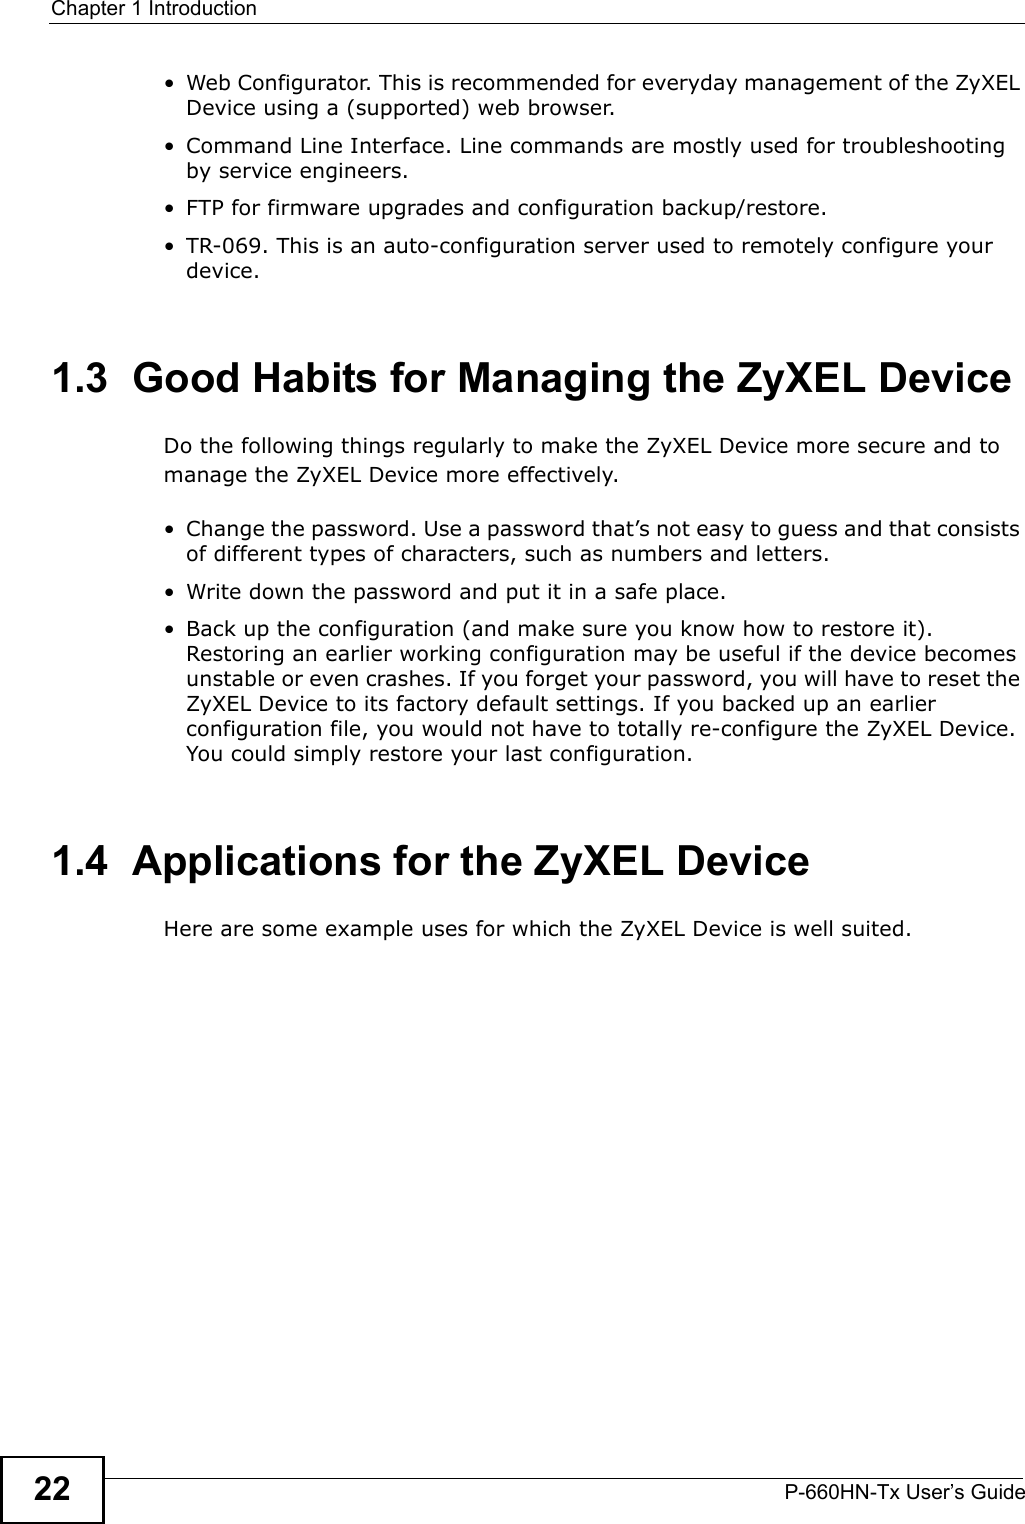 Chapter 1 IntroductionP-660HN-Tx User’s Guide22•Web Configurator. This is recommended for everyday management of the ZyXEL Device using a (supported) web browser.• Command Line Interface. Line commands are mostly used for troubleshooting by service engineers.• FTP for firmware upgrades and configuration backup/restore.• TR-069. This is an auto-configuration server used to remotely configure your device.1.3  Good Habits for Managing the ZyXEL DeviceDo the following things regularly to make the ZyXEL Device more secure and to manage the ZyXEL Device more effectively.• Change the password. Use a password that’s not easy to guess and that consists of different types of characters, such as numbers and letters.• Write down the password and put it in a safe place.• Back up the configuration (and make sure you know how to restore it). Restoring an earlier working configuration may be useful if the device becomes unstable or even crashes. If you forget your password, you will have to reset the ZyXEL Device to its factory default settings. If you backed up an earlier configuration file, you would not have to totally re-configure the ZyXEL Device. You could simply restore your last configuration.1.4  Applications for the ZyXEL DeviceHere are some example uses for which the ZyXEL Device is well suited.